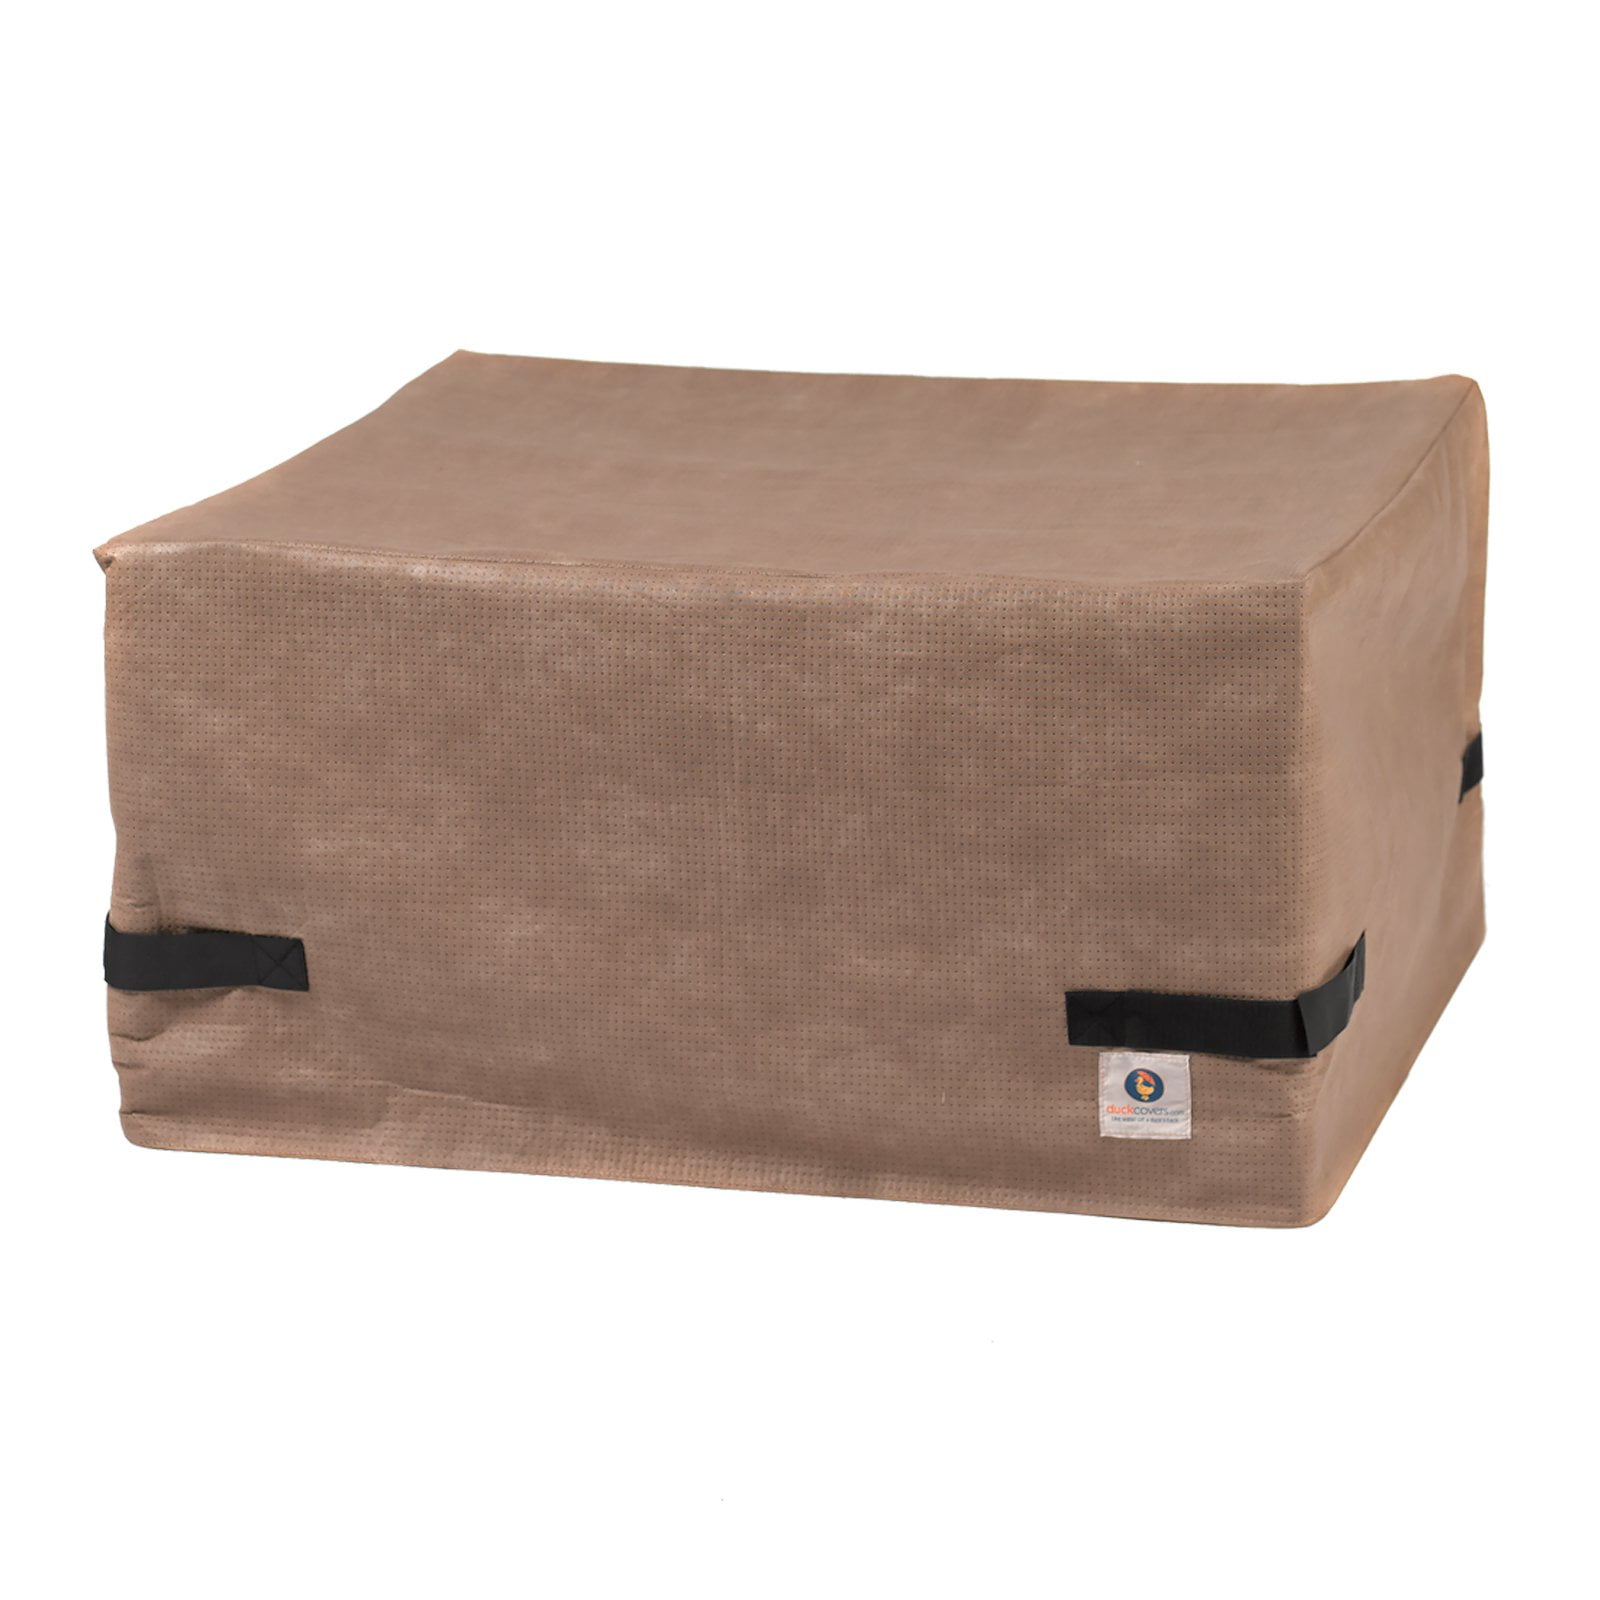 Duck Covers Elite Water-Resistant 40 Inch Square Fire Pit Cover